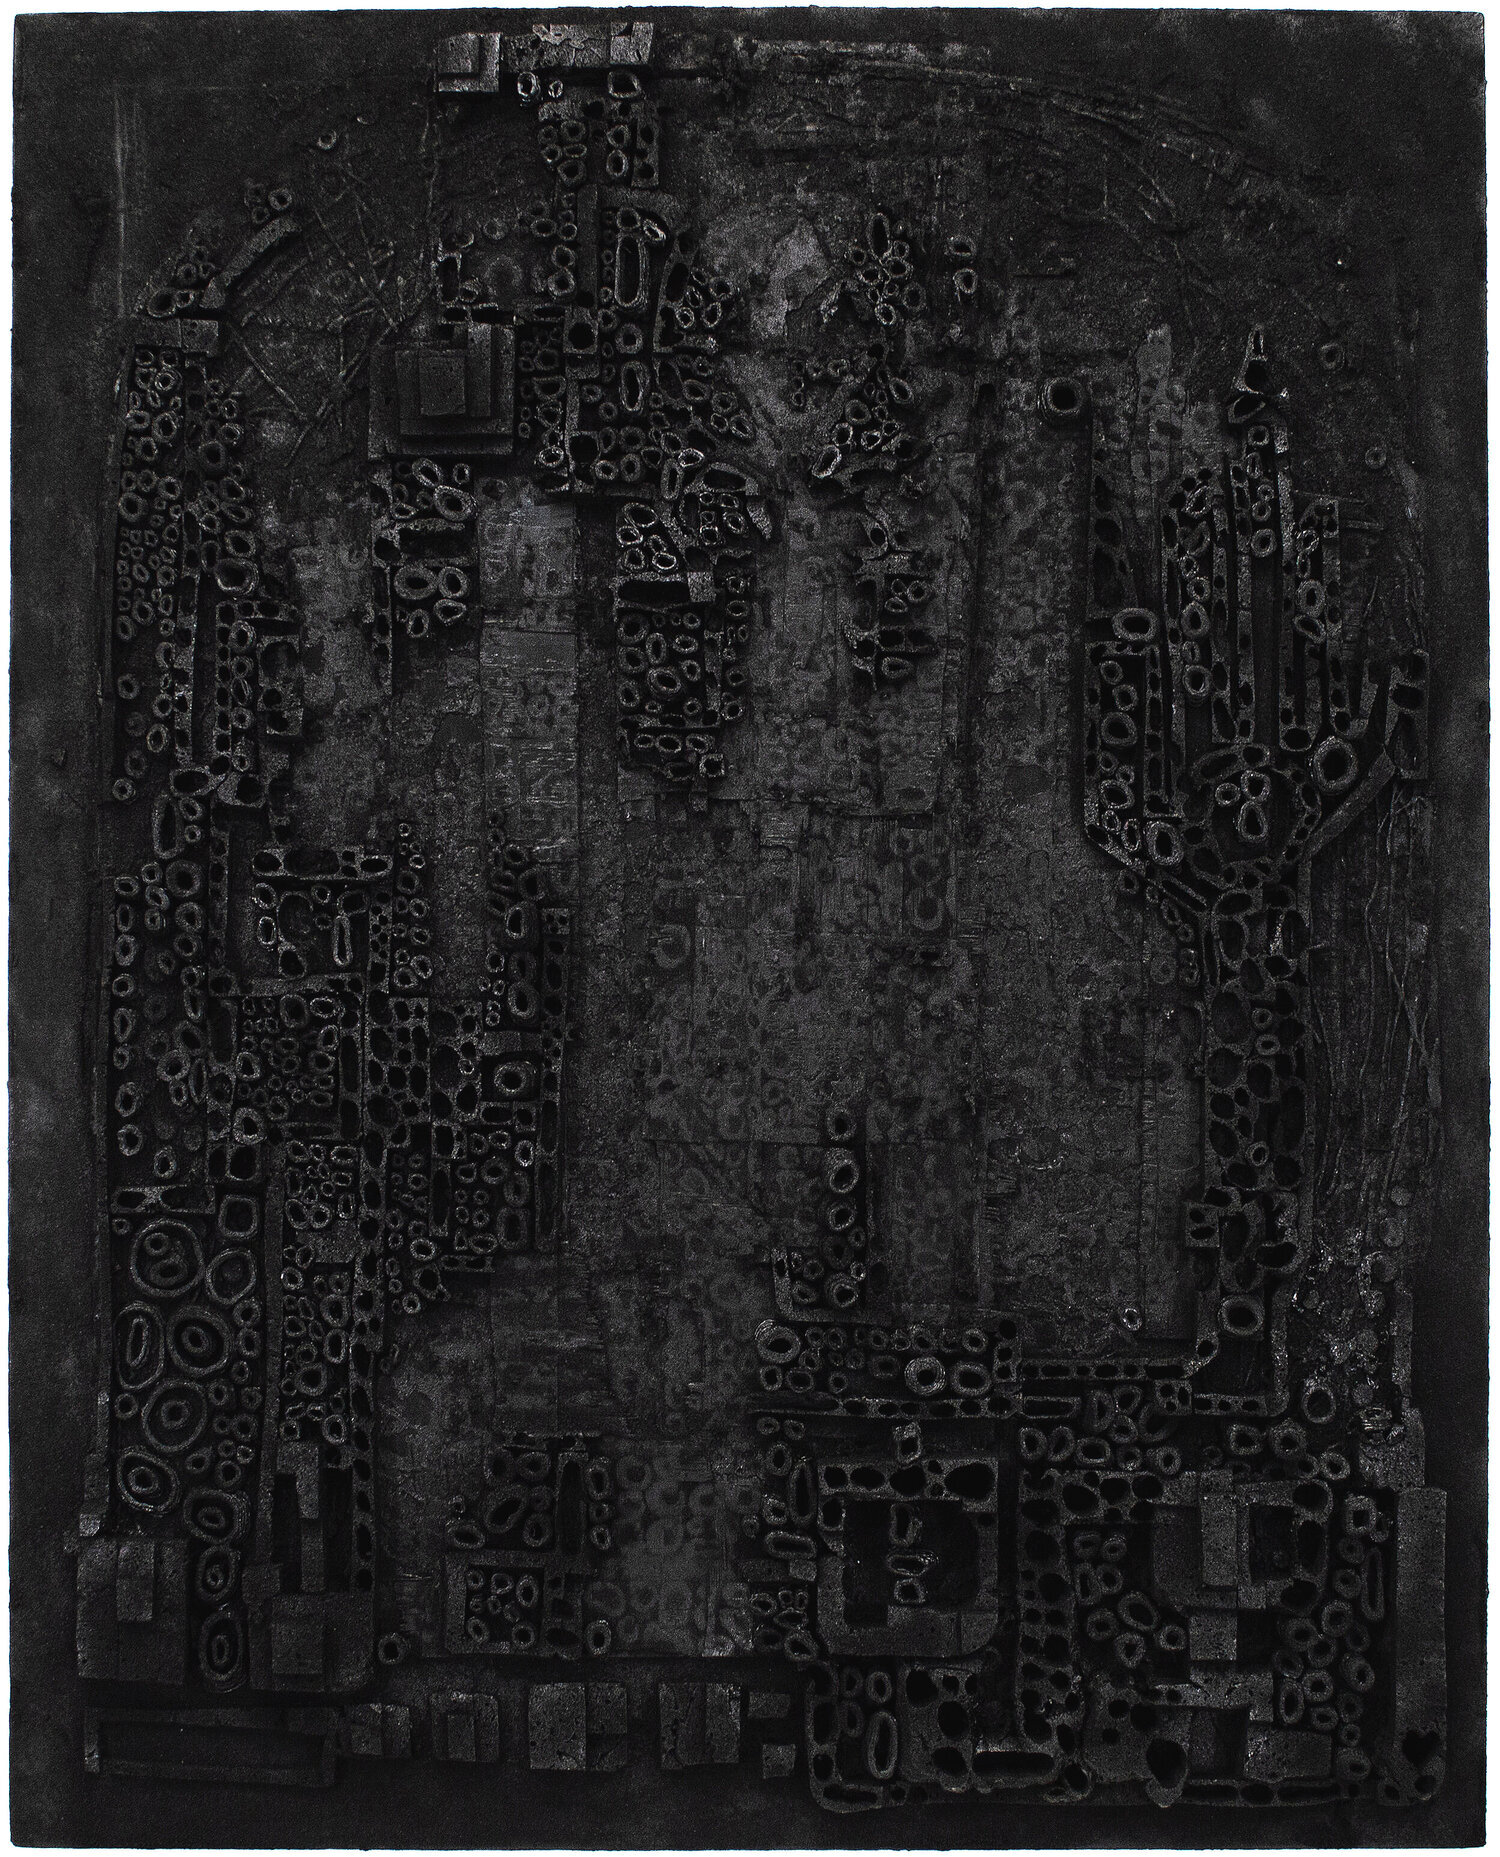  Black Cathedral - Mixed media on canvas. 60 x 48 inches 